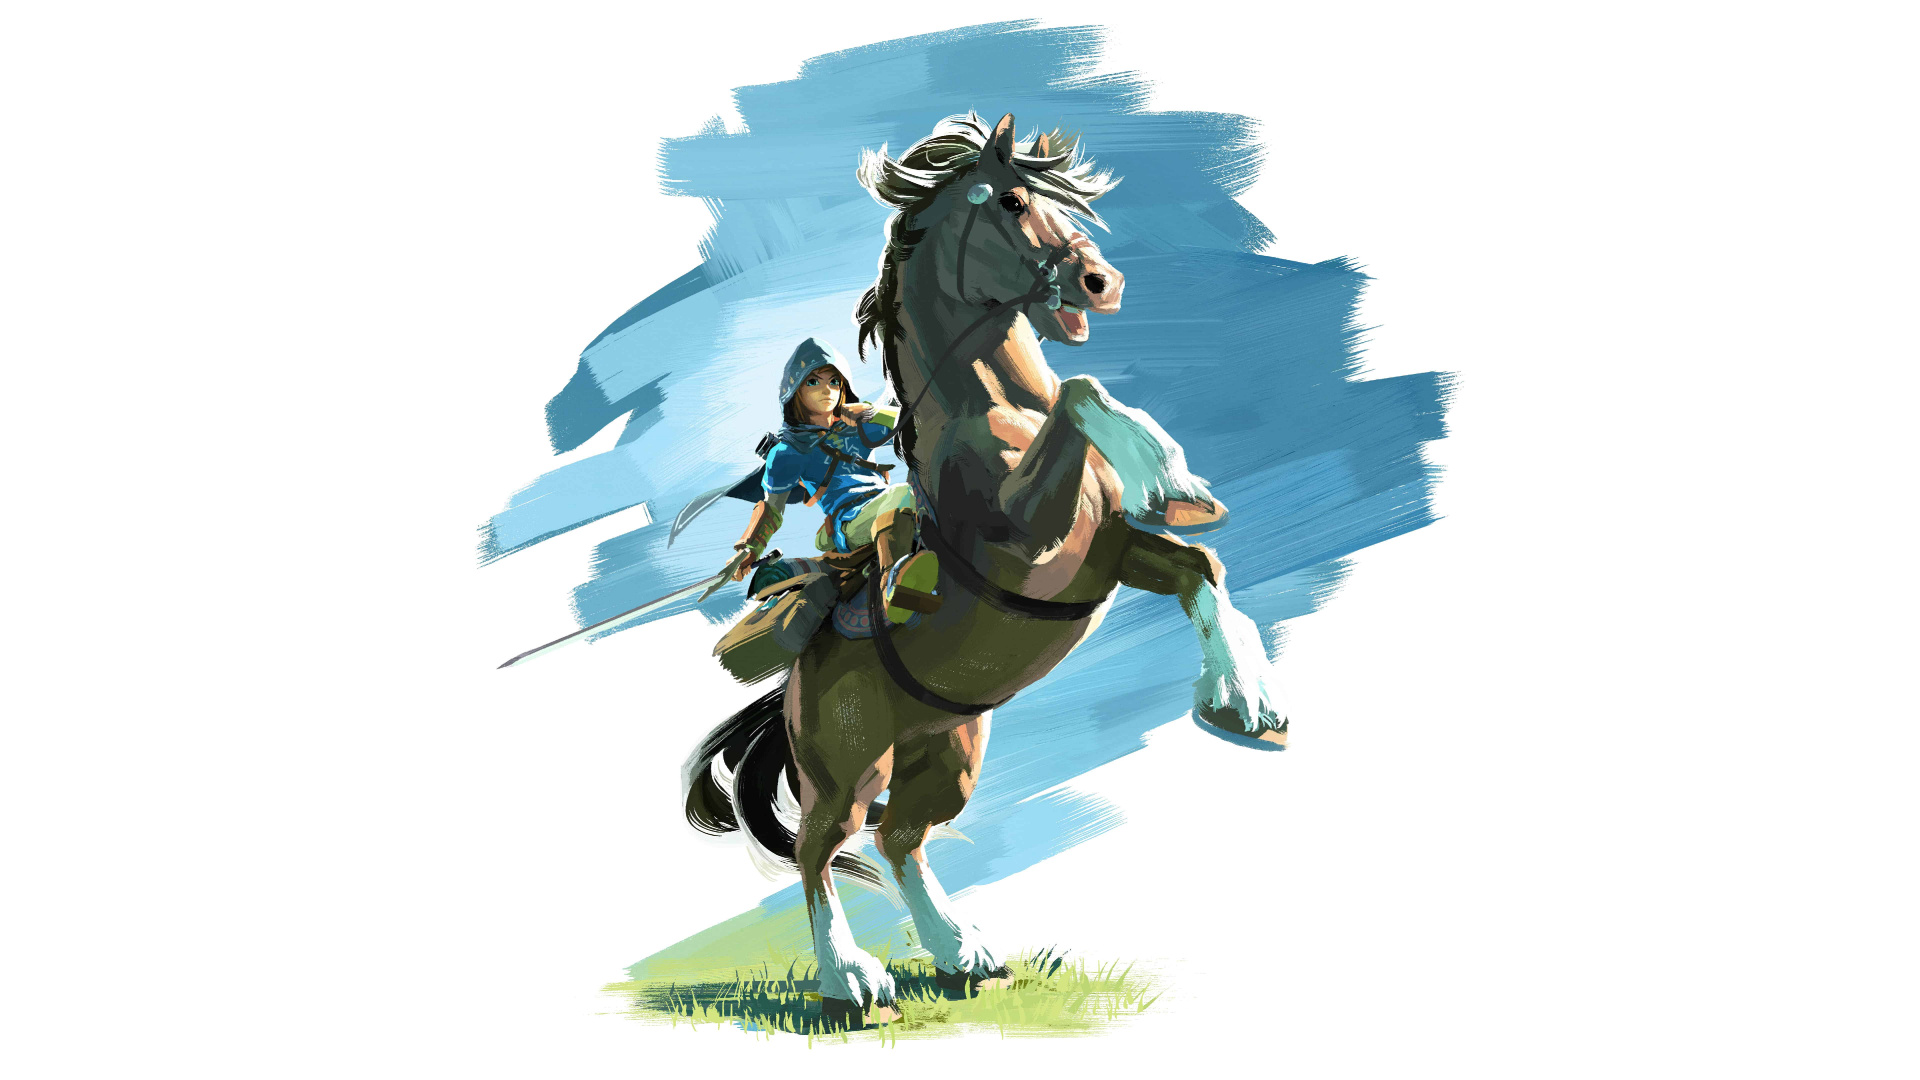 Woman in Blue Dress Riding White Horse Illustration. Wallpaper in 1920x1080 Resolution